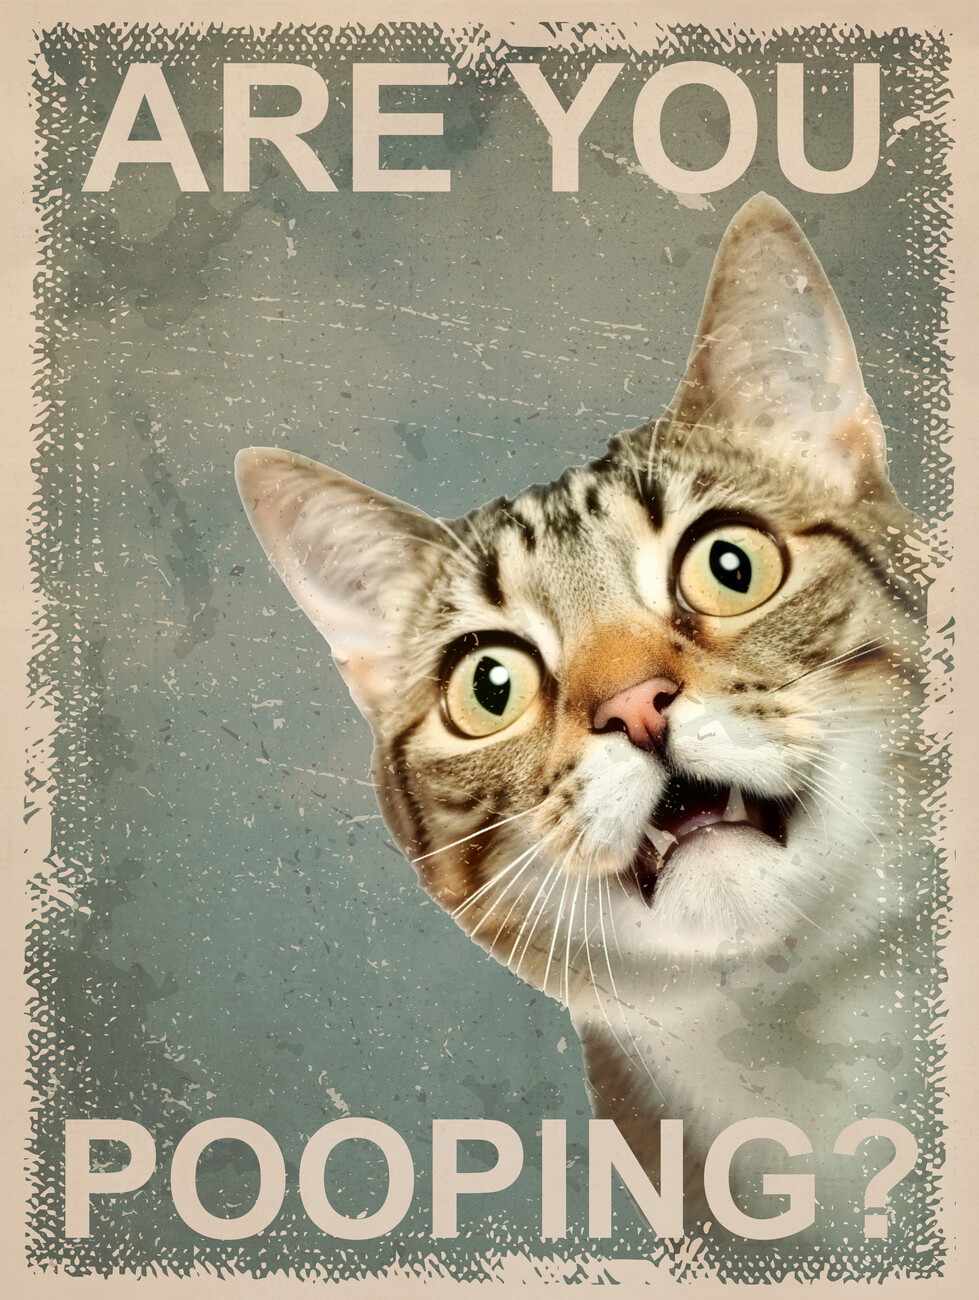 Illustration Funny Cat: Are You Pooping?